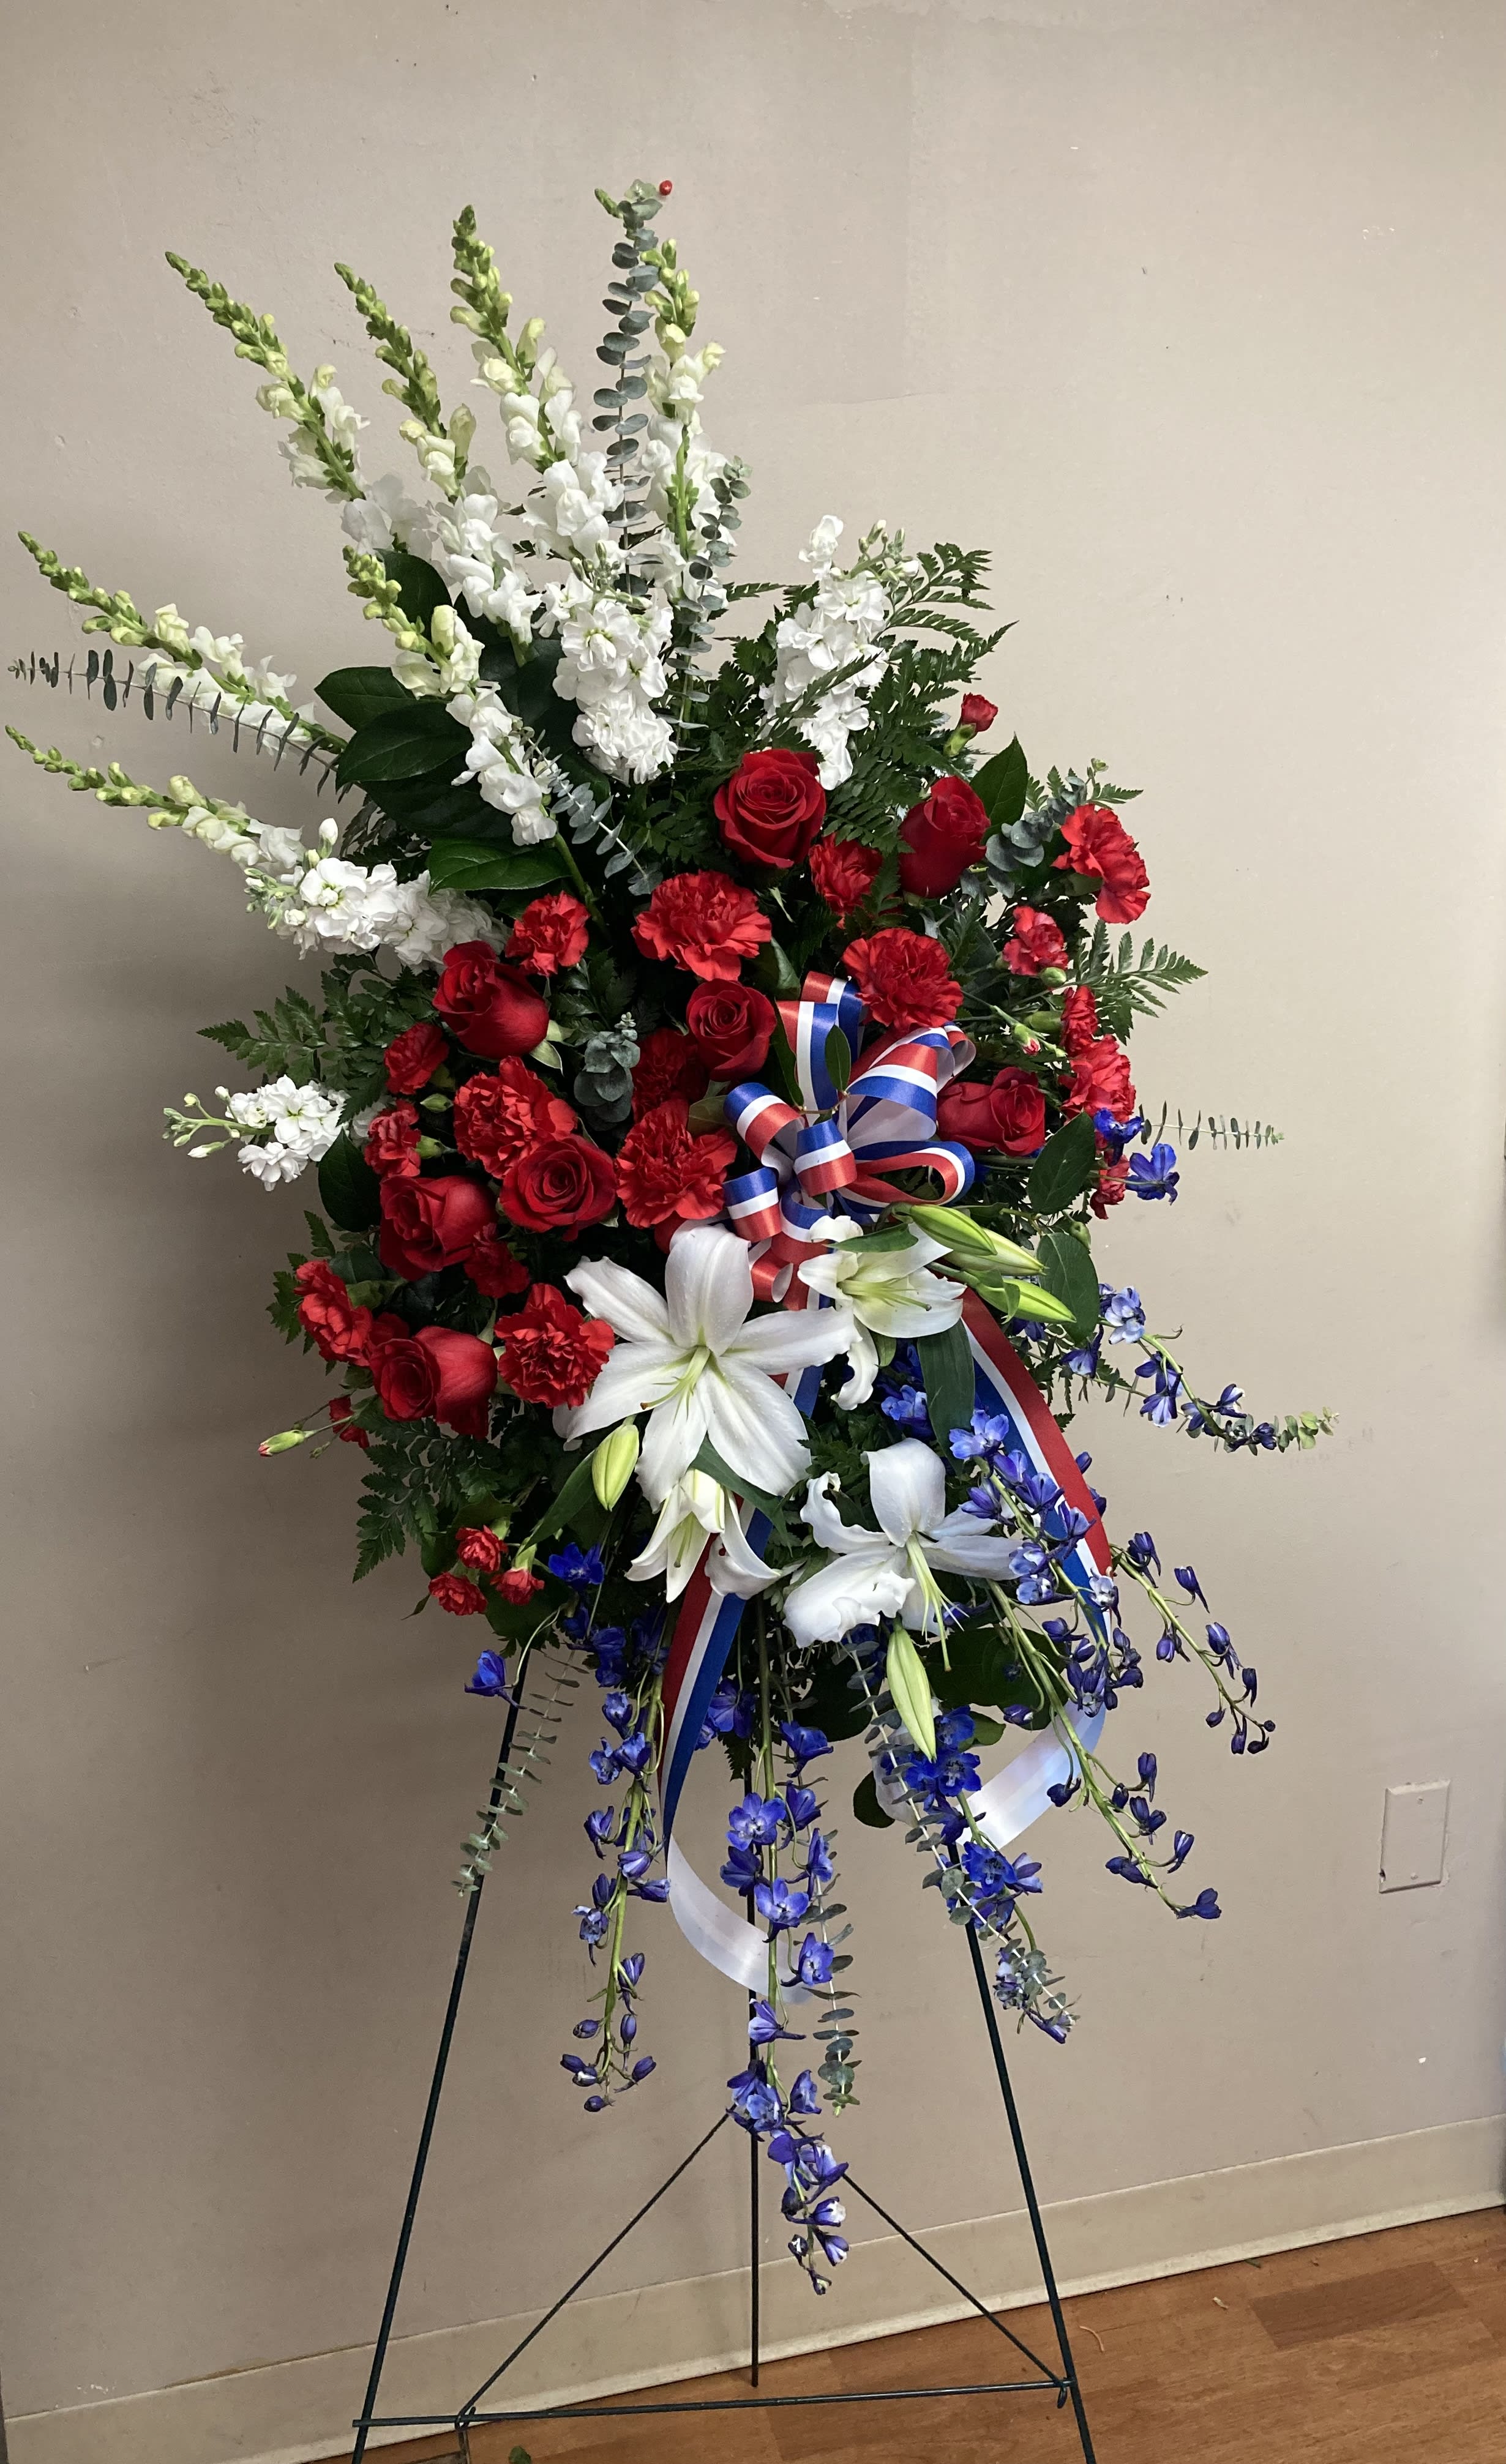 Honorable - Stunning funeral spray featuring red, white and blue. Snapdragons, delphinium, roses, lily and carnations.  Lovely honor for a loved one.